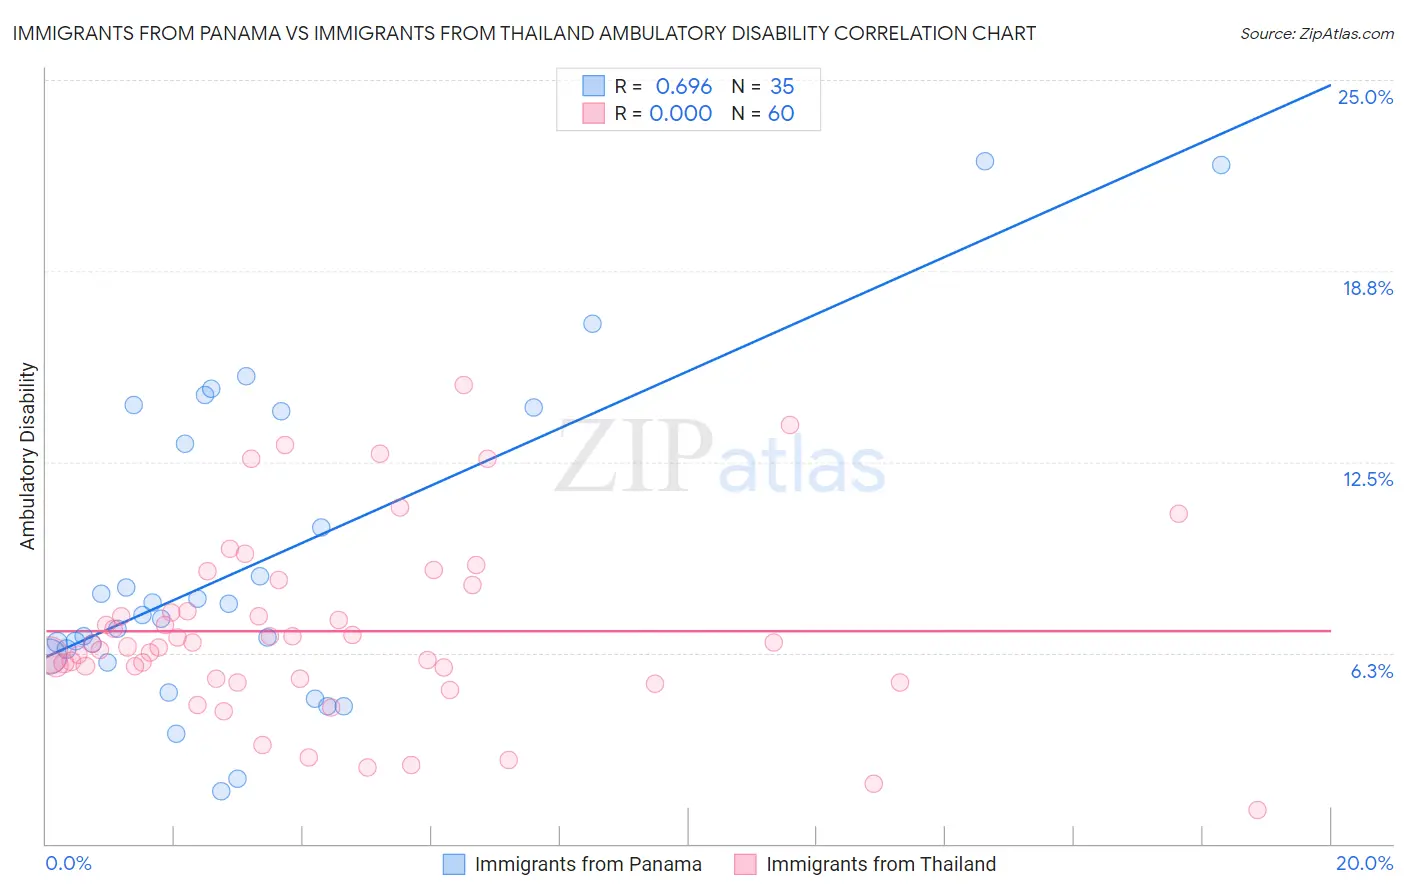 Immigrants from Panama vs Immigrants from Thailand Ambulatory Disability